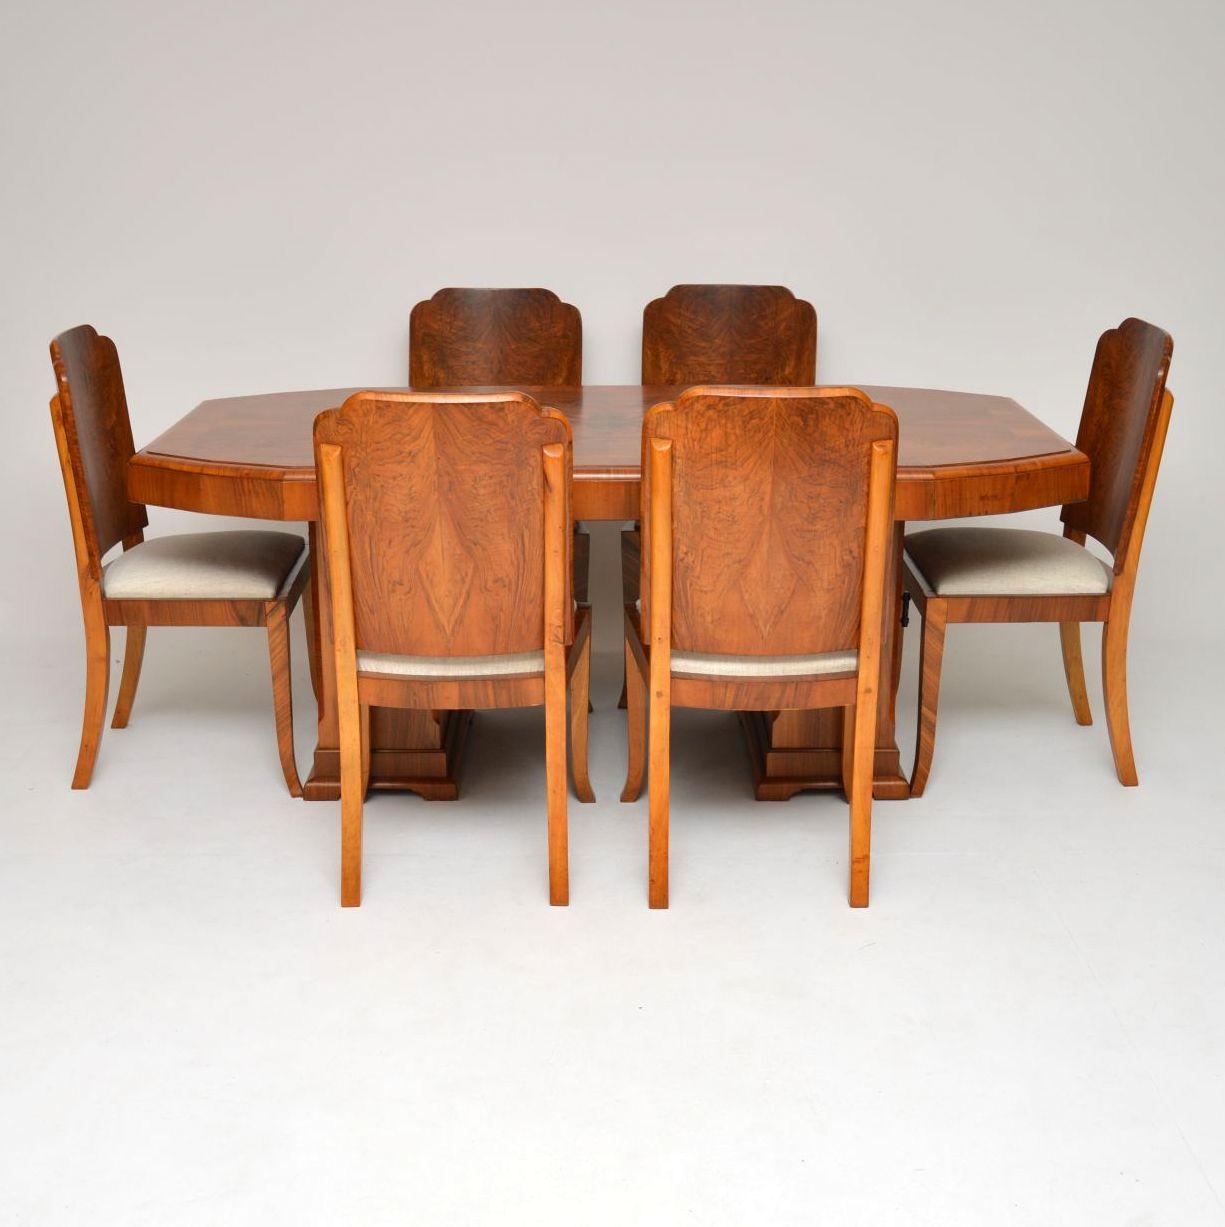 A stunning and extremely well made original vintage Art Deco dining suite in walnut, this dates from the 1920s-1930s. We have had this fully restored, the condition is superb throughout. The table and chairs have all been fully stripped and